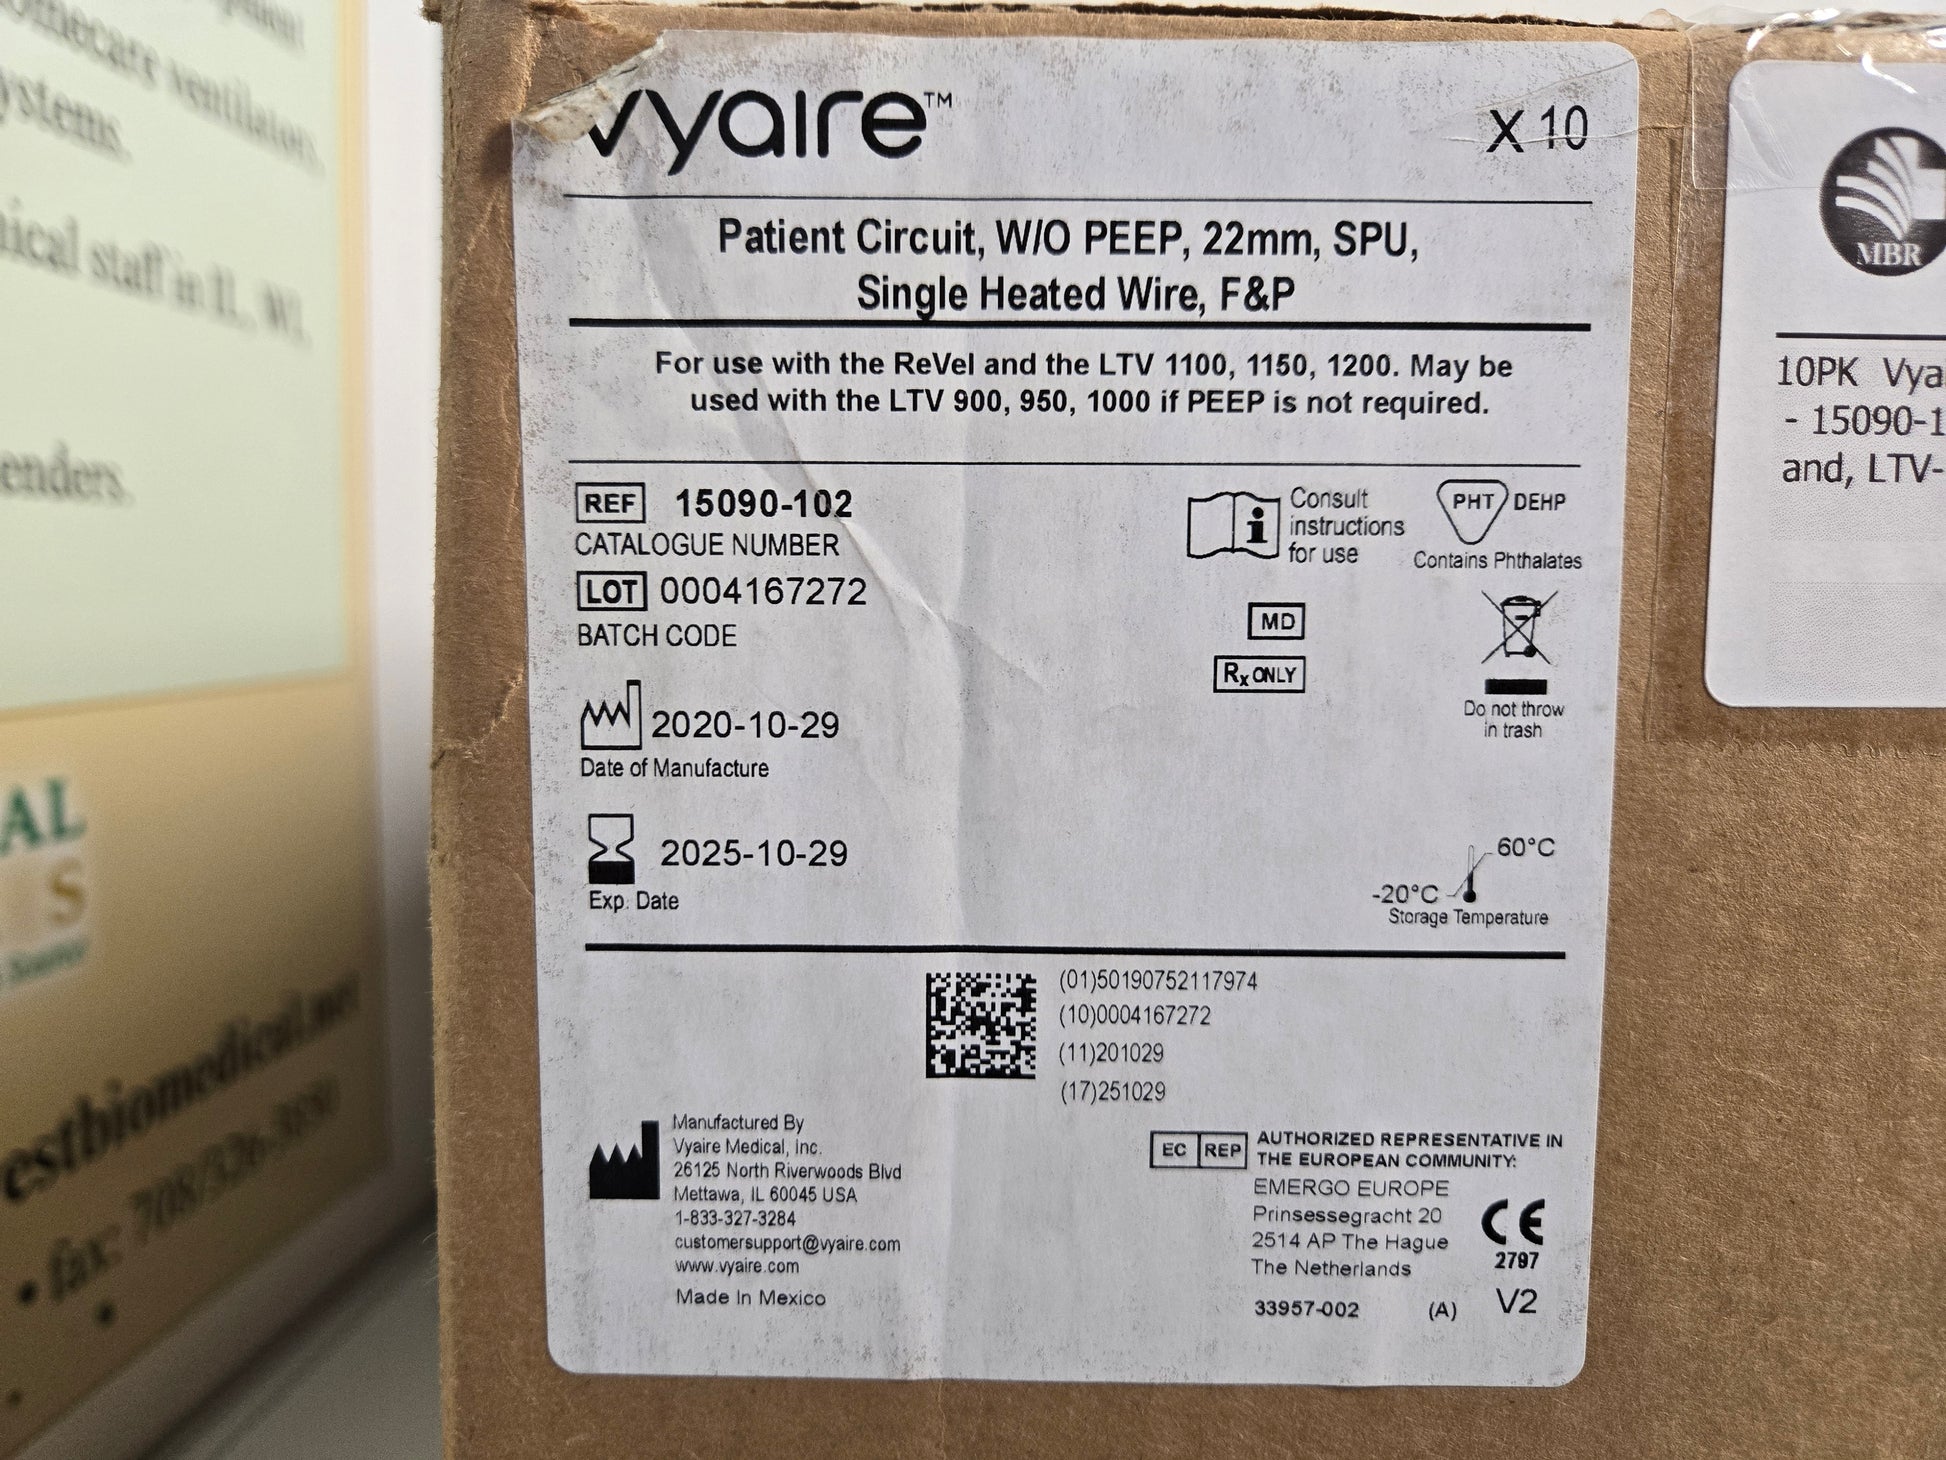 NEW 10PK Vyaire Heated Patient Circuit WO PEEP 22mm for LTV-1150 , LTV-1200 , LTV-1100